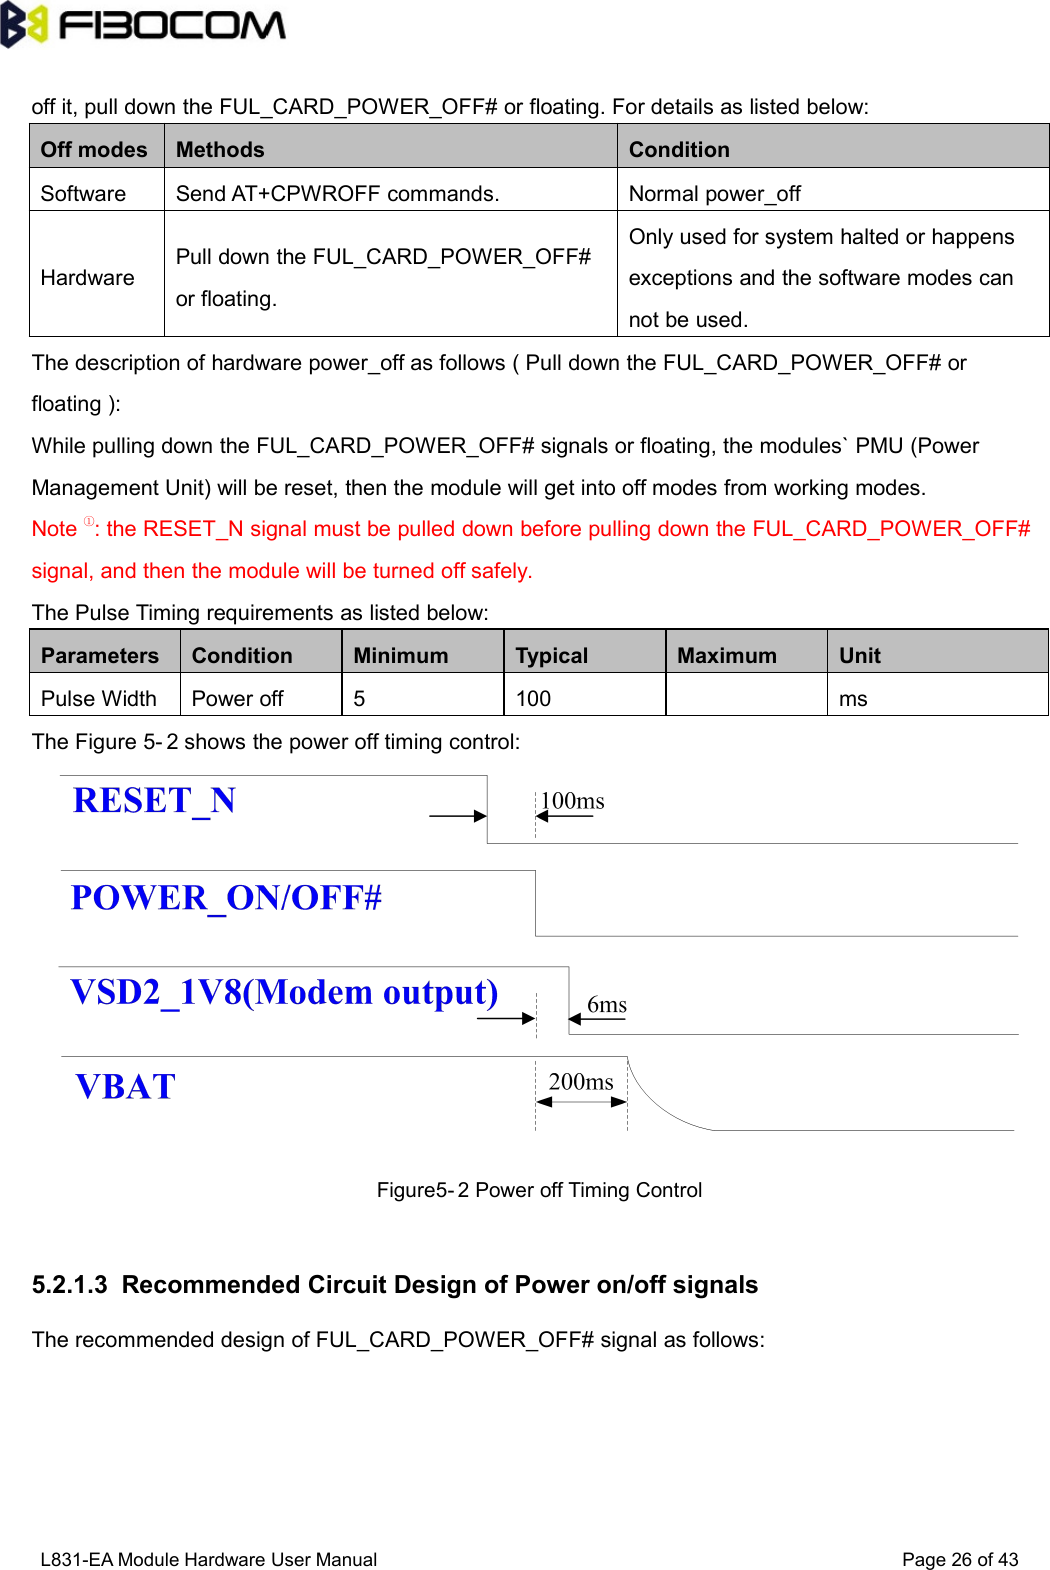 L831-EA Module Hardware User Manual Page26of43off it, pull down the FUL_CARD_POWER_OFF# or floating. For details as listed below:Off modesMethodsConditionSoftwareSend AT+CPWROFF commands.Normal power_offHardwarePull down the FUL_CARD_POWER_OFF#or floating.Only used for system halted or happensexceptions and the software modes cannot be used.The description of hardware power_off as follows ( Pull down the FUL_CARD_POWER_OFF# orfloating ):While pulling down the FUL_CARD_POWER_OFF# signals or floating, the modules` PMU (PowerManagement Unit) will be reset, then the module will get into off modes from working modes.Note ①: the RESET_N signal must be pulled down before pulling down the FUL_CARD_POWER_OFF#signal, and then the module will be turned off safely.The Pulse Timing requirements as listed below:ParametersConditionMinimumTypicalMaximumUnitPulse WidthPower off5100msThe Figure 5- 2 shows the power off timing control:Figure5- 2 Power off Timing Control5.2.1.3 Recommended Circuit Design of Power on/off signalsThe recommended design of FUL_CARD_POWER_OFF# signal as follows: